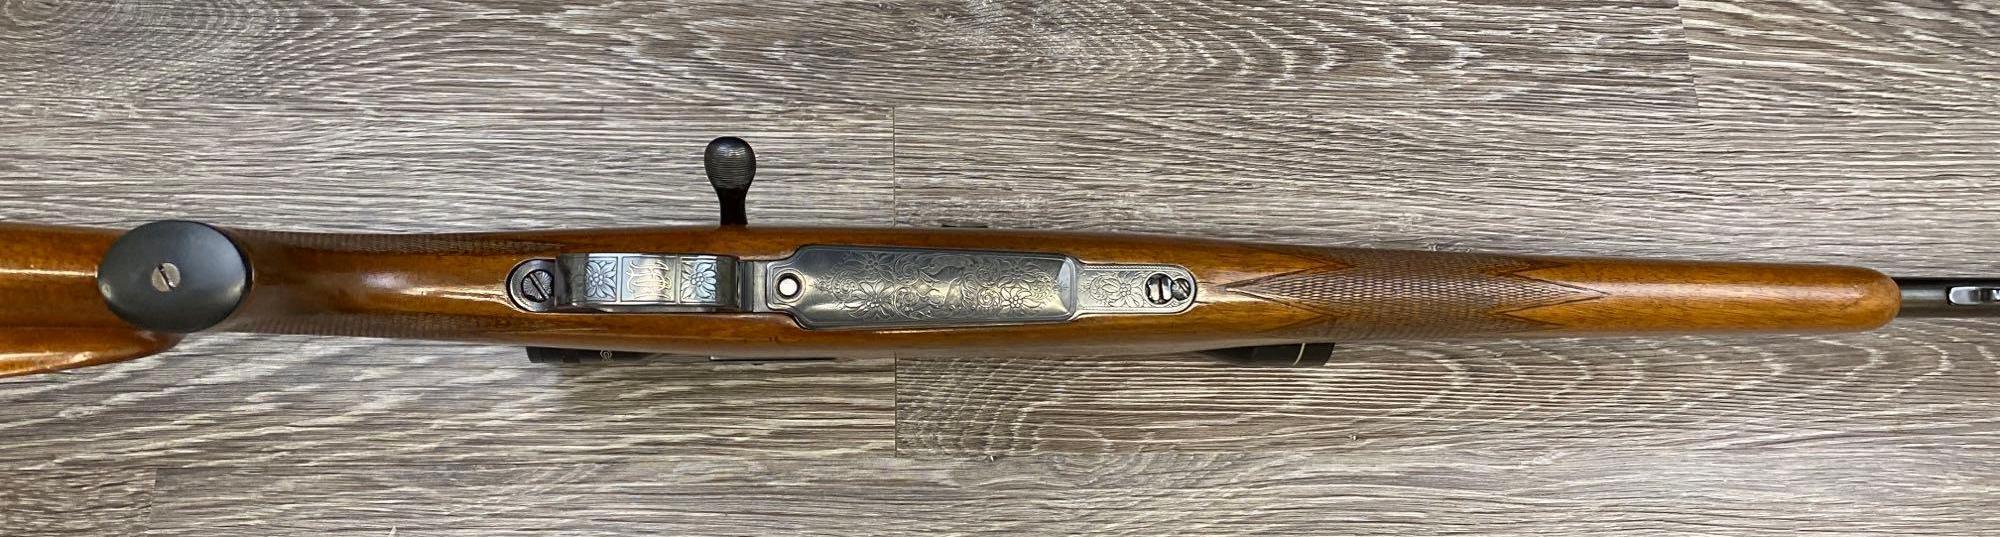 COMMERCIAL OBERNDORF MAUSER BOLT-ACTION SPORTING RIFLE 8 X 57 w/SCOPE